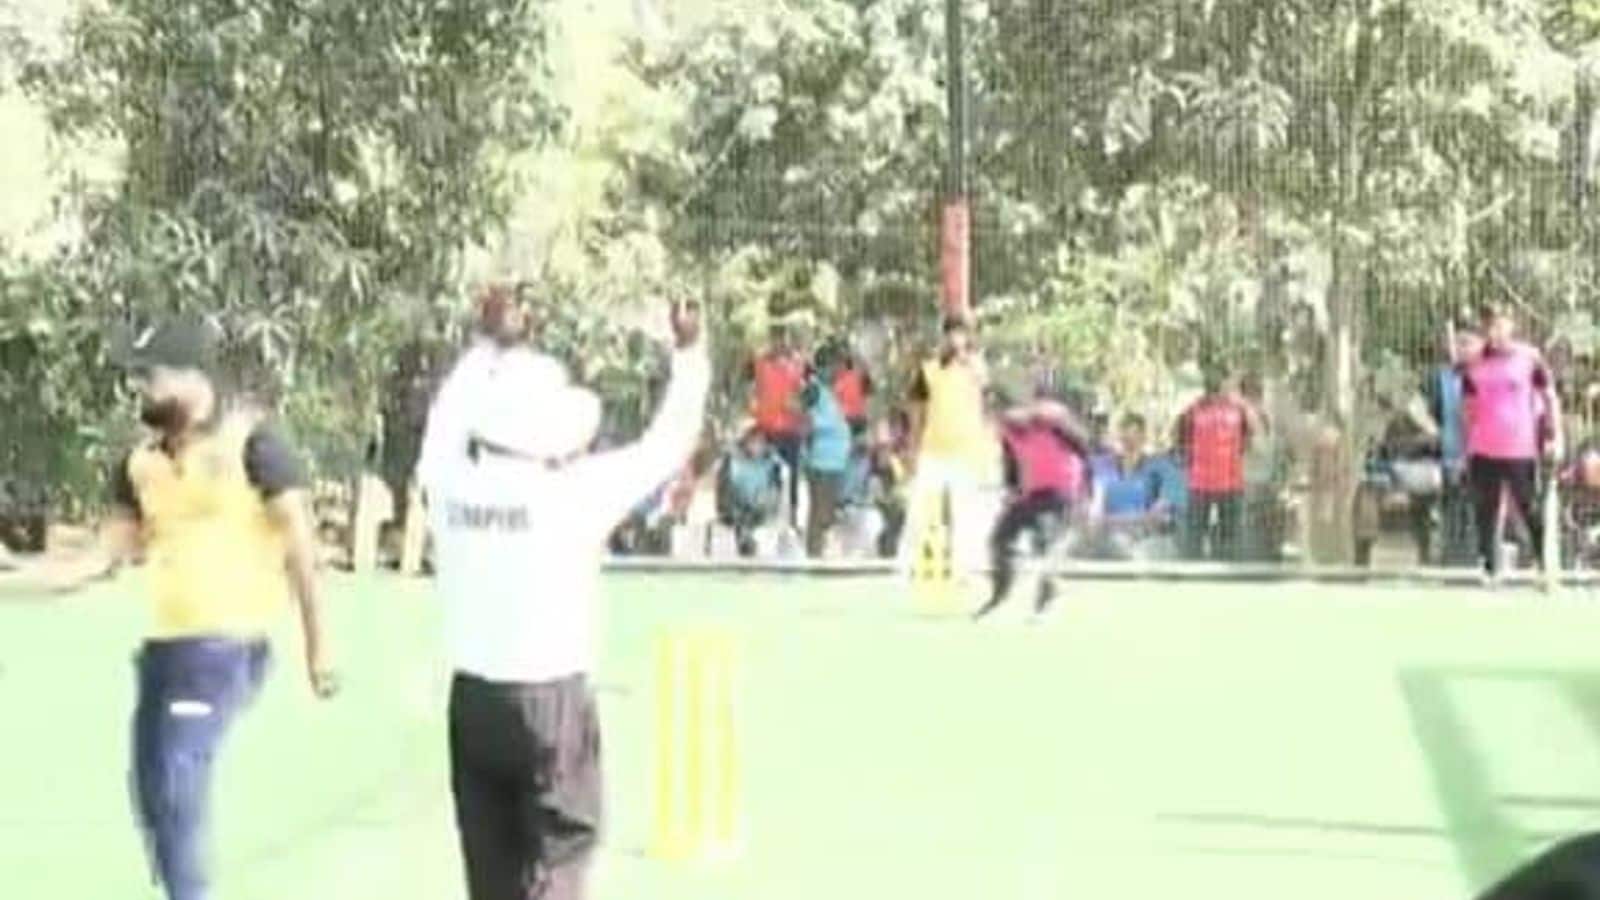 Thane: Man dies immediately after hitting 6 in match